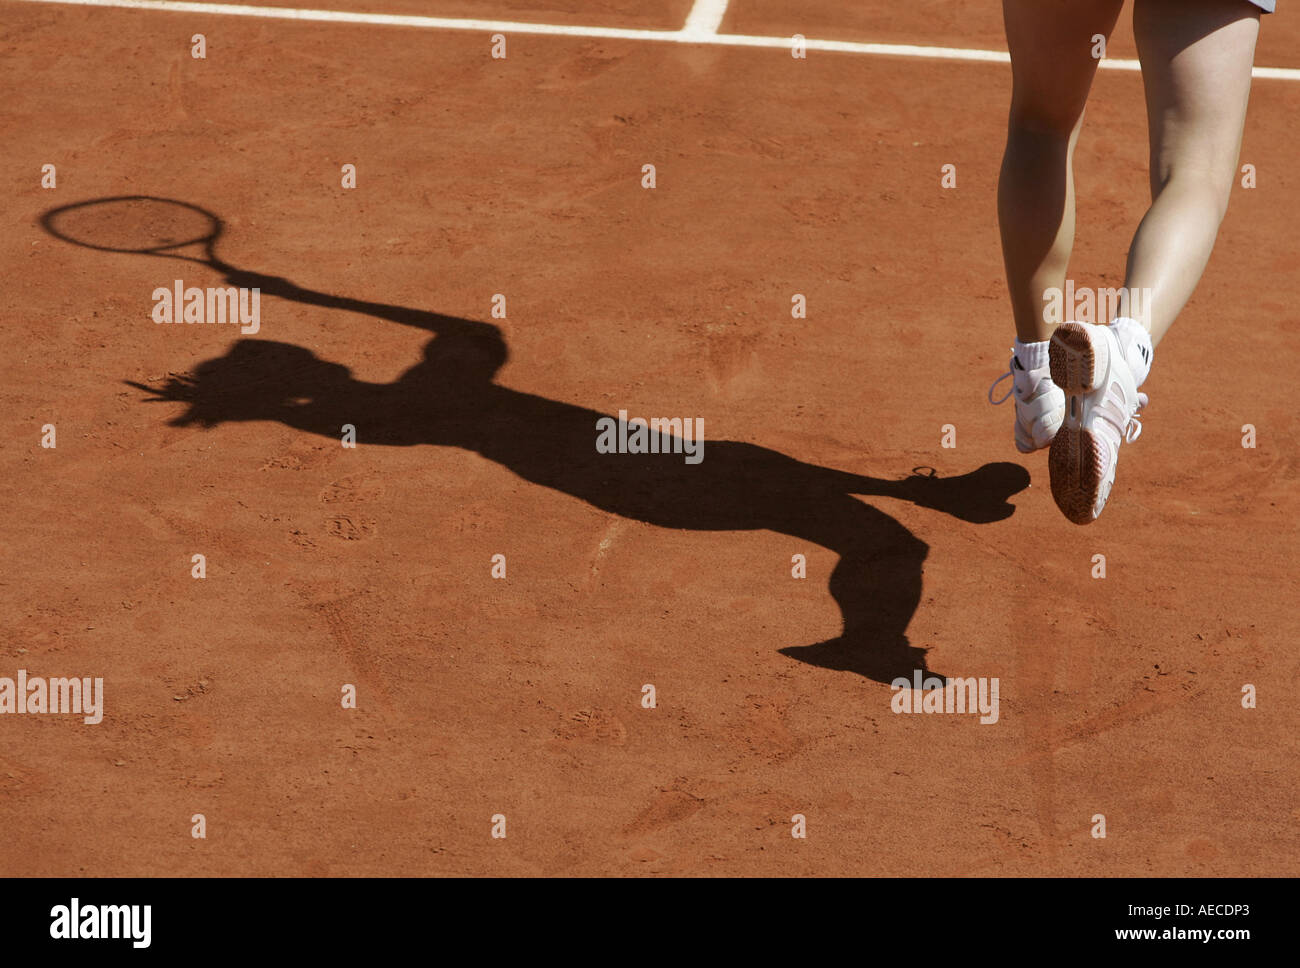 shadow of a tennis player on a claycourt. Stock Photo